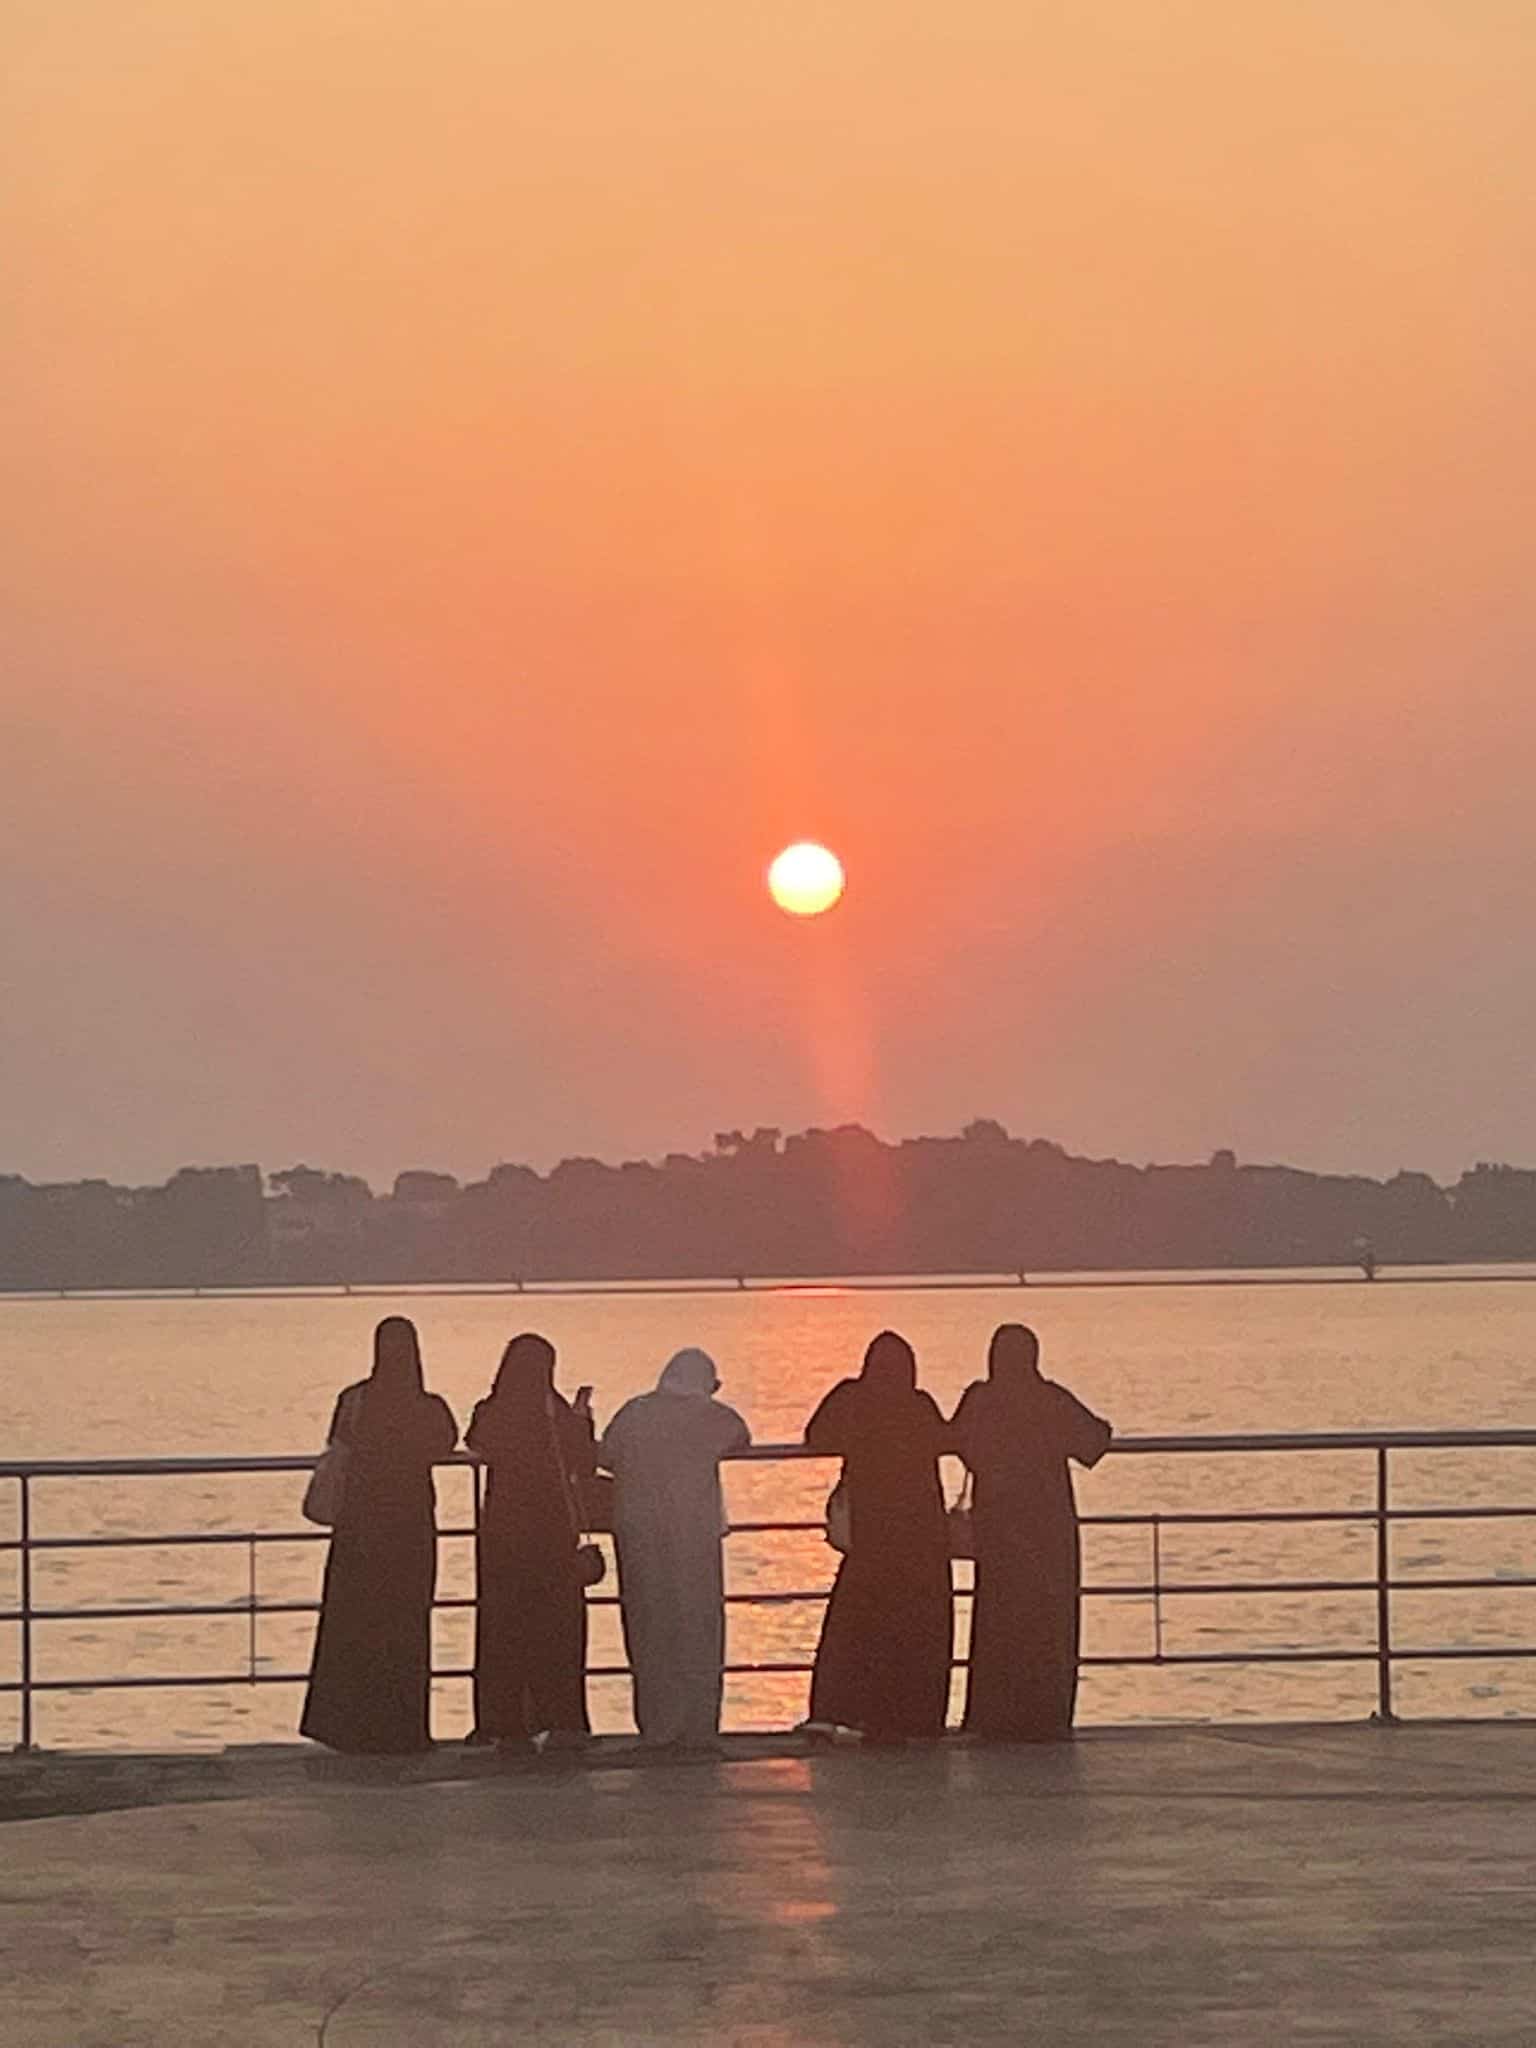 Saudi ladies in Jeddah wearing traditional local attire whilst watching the sun set over the Red Sea